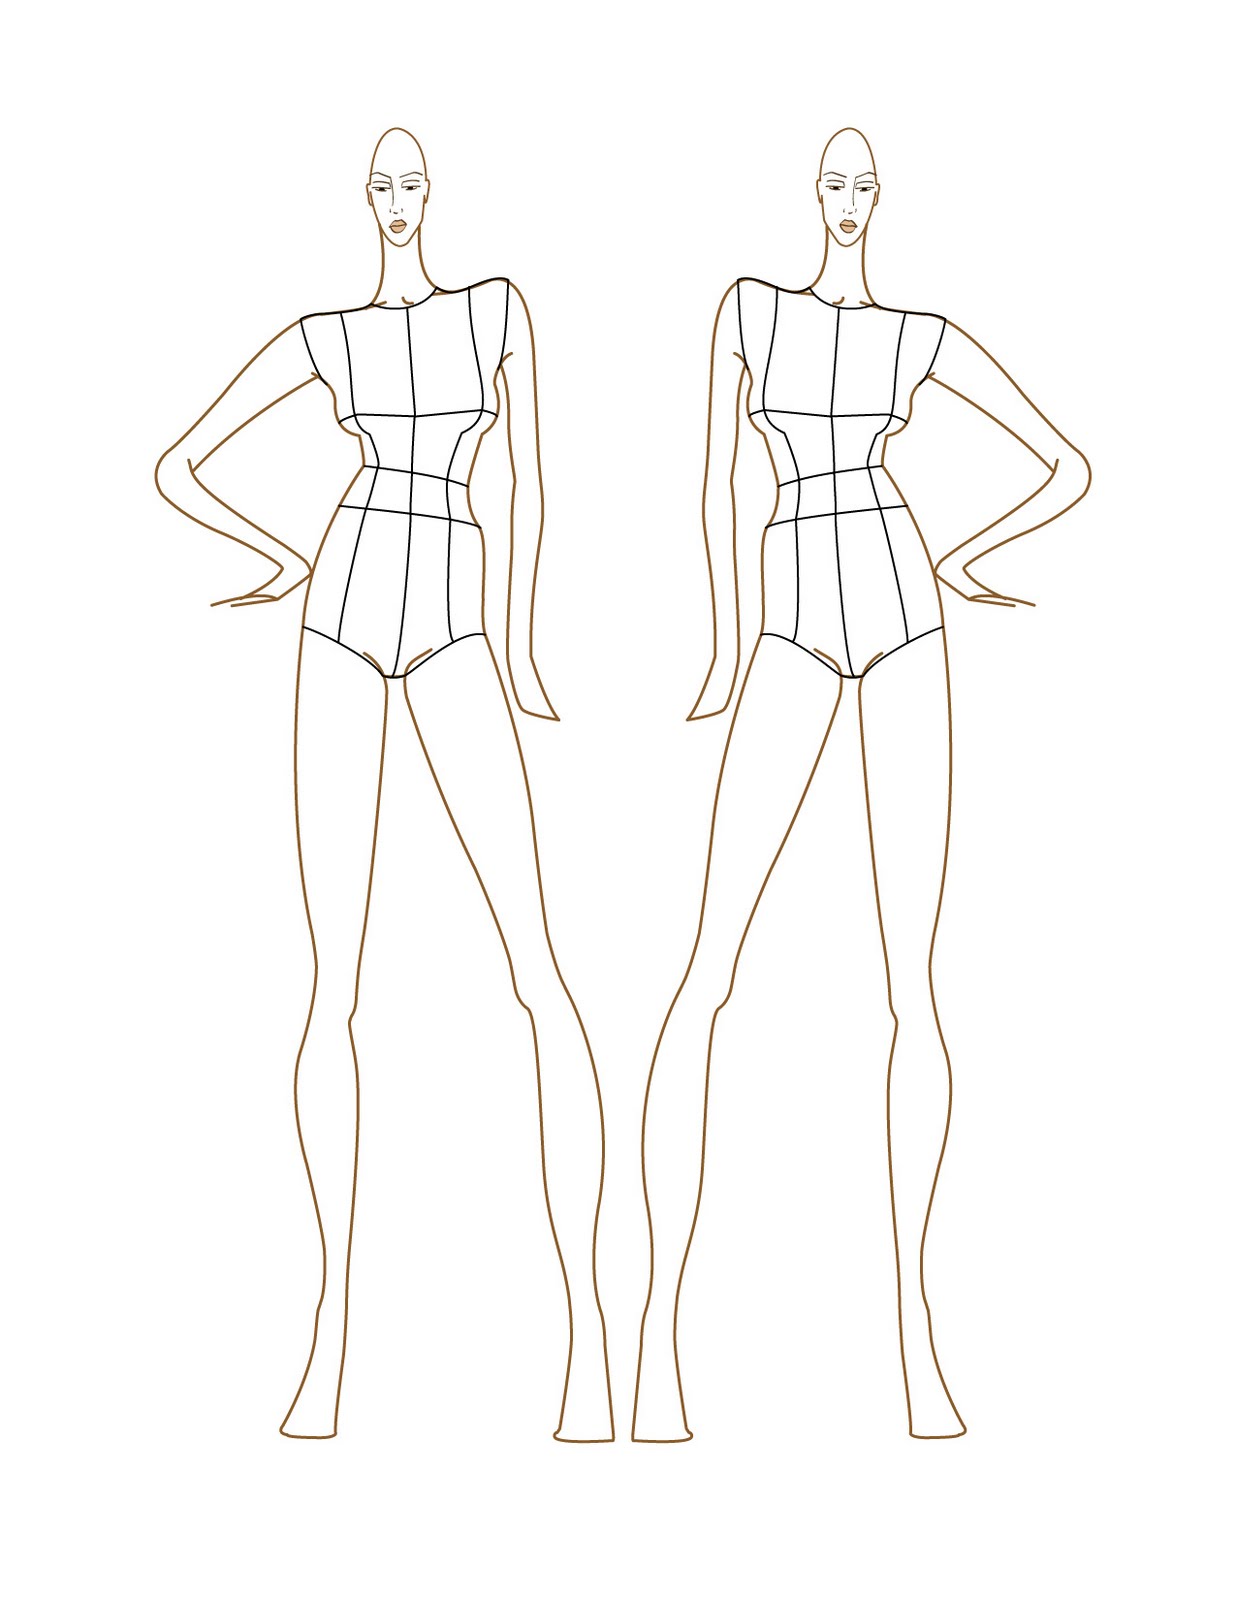 Costume Sketch Template at PaintingValley.com | Explore collection of